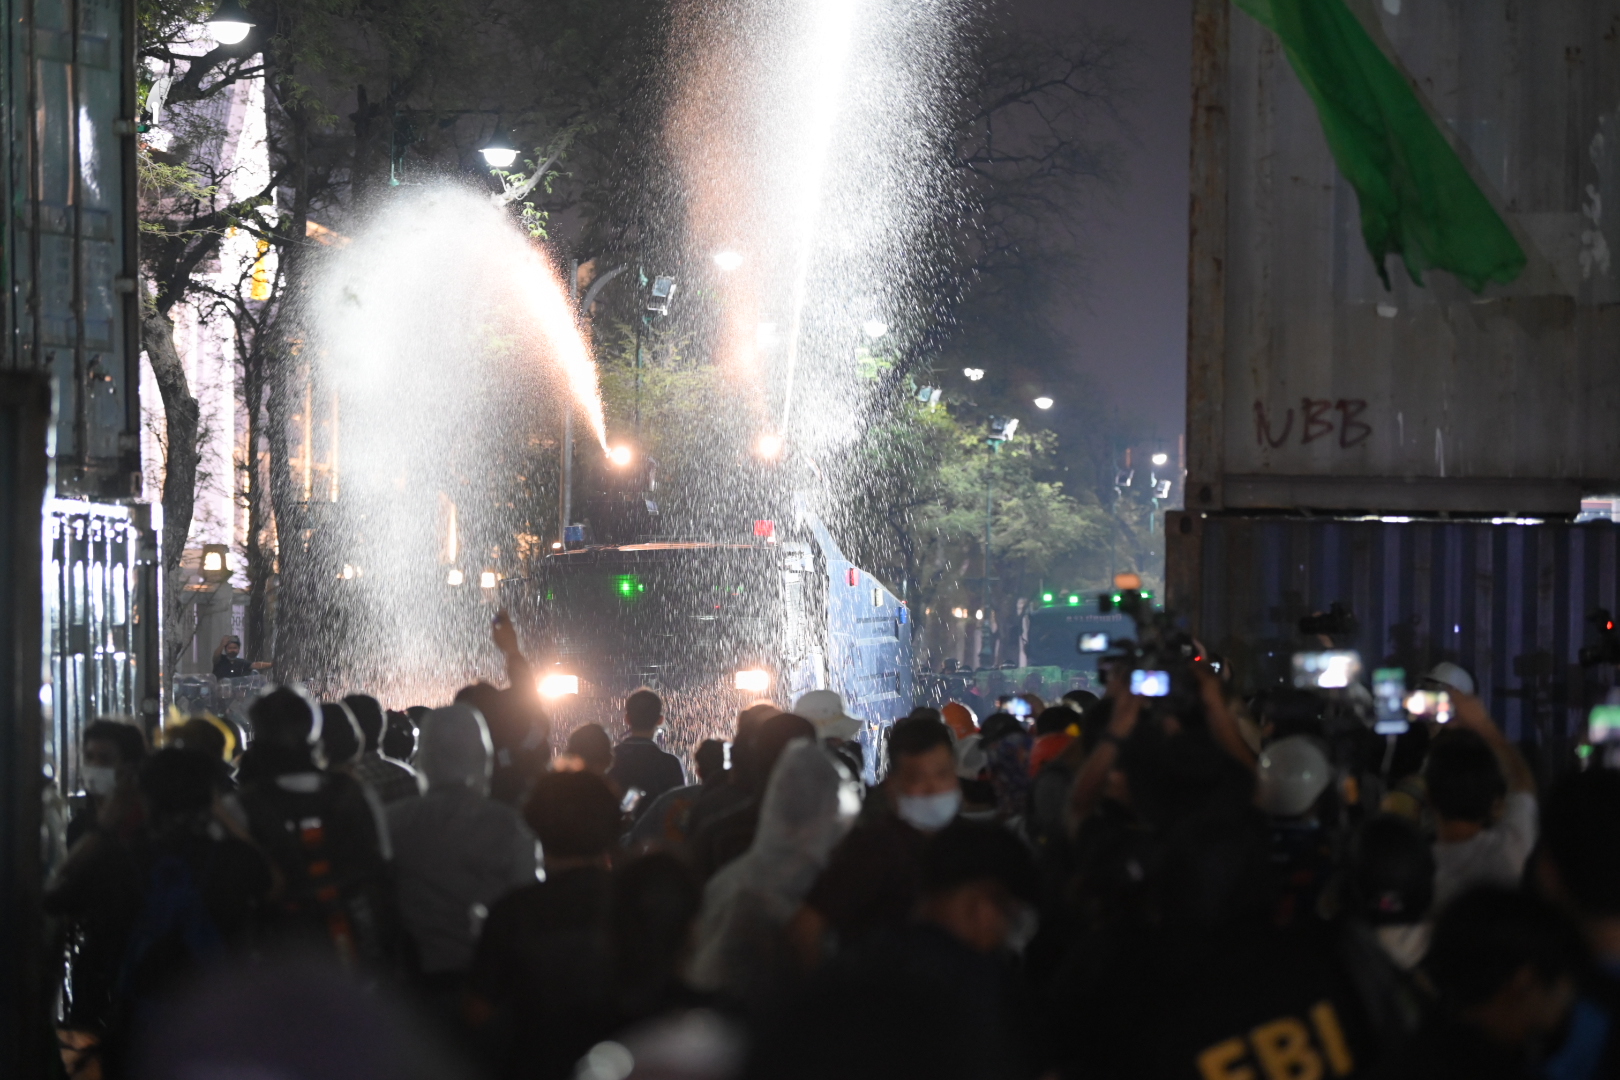 Police use water cannons to disperse protesters during the anti-government protest near the Grand Palace on Mar. 21, 2021.